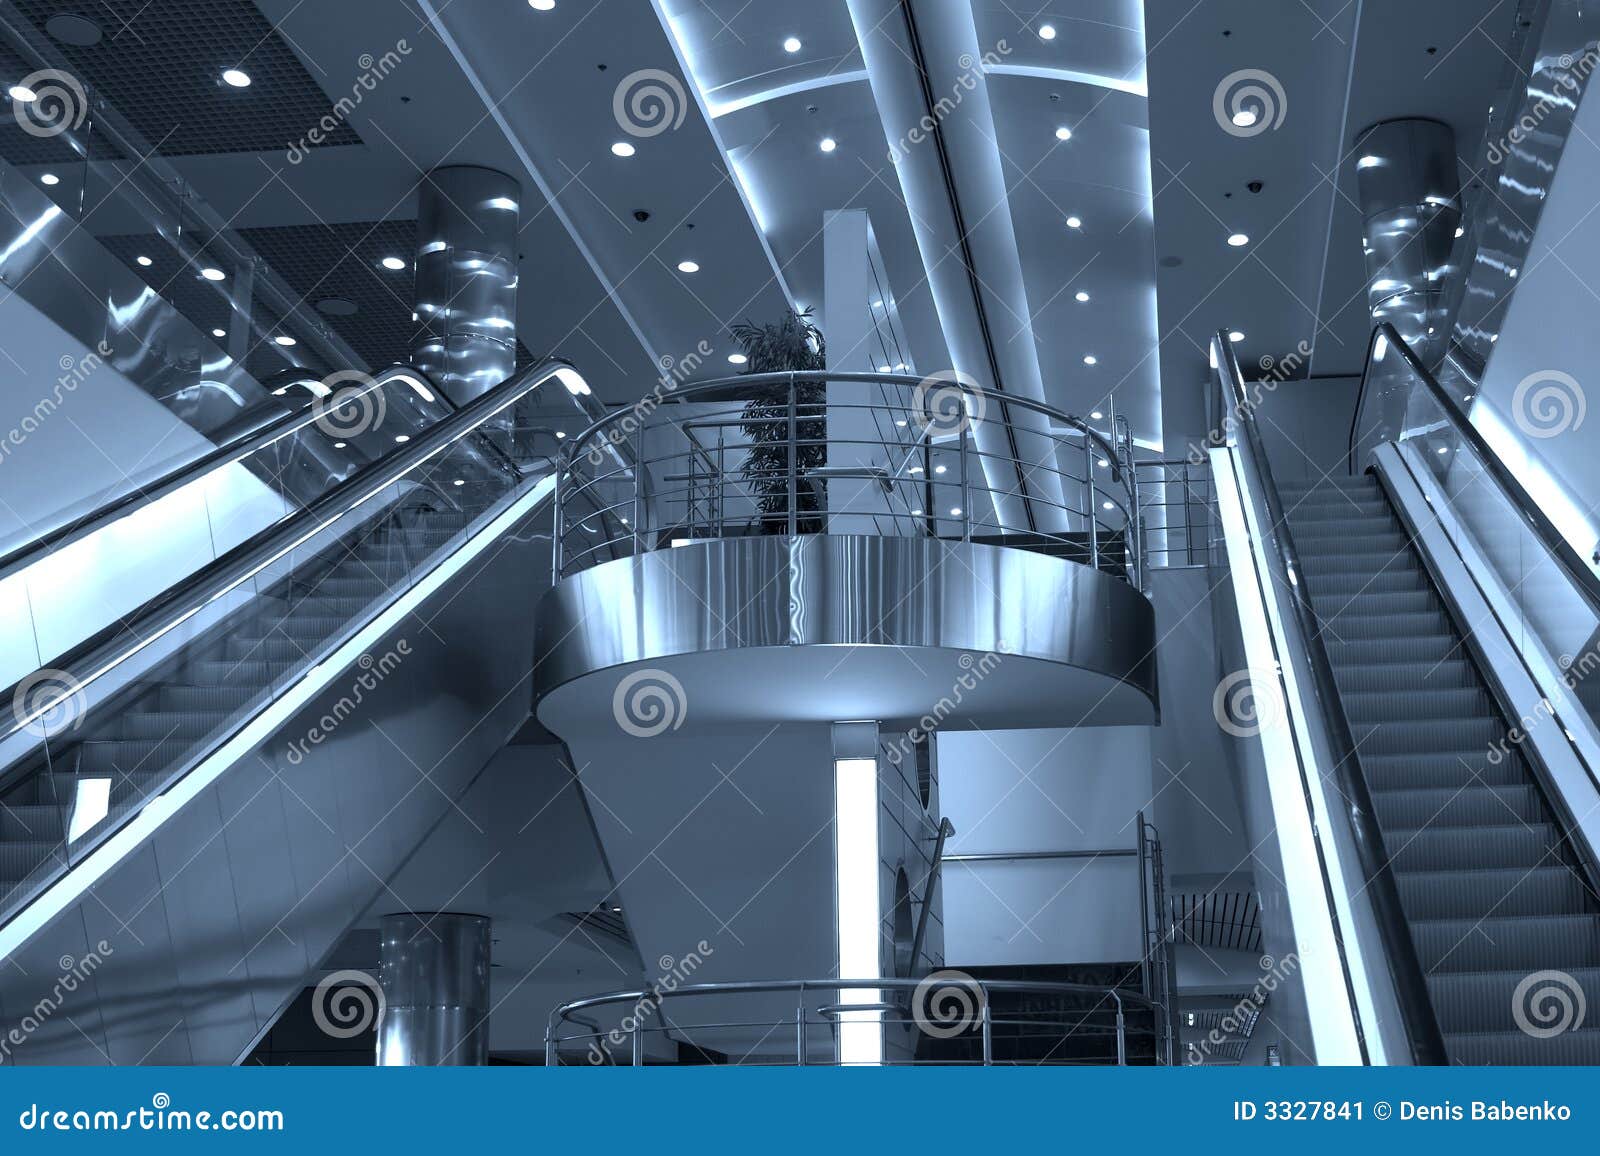 escalators and stairs ,domoded